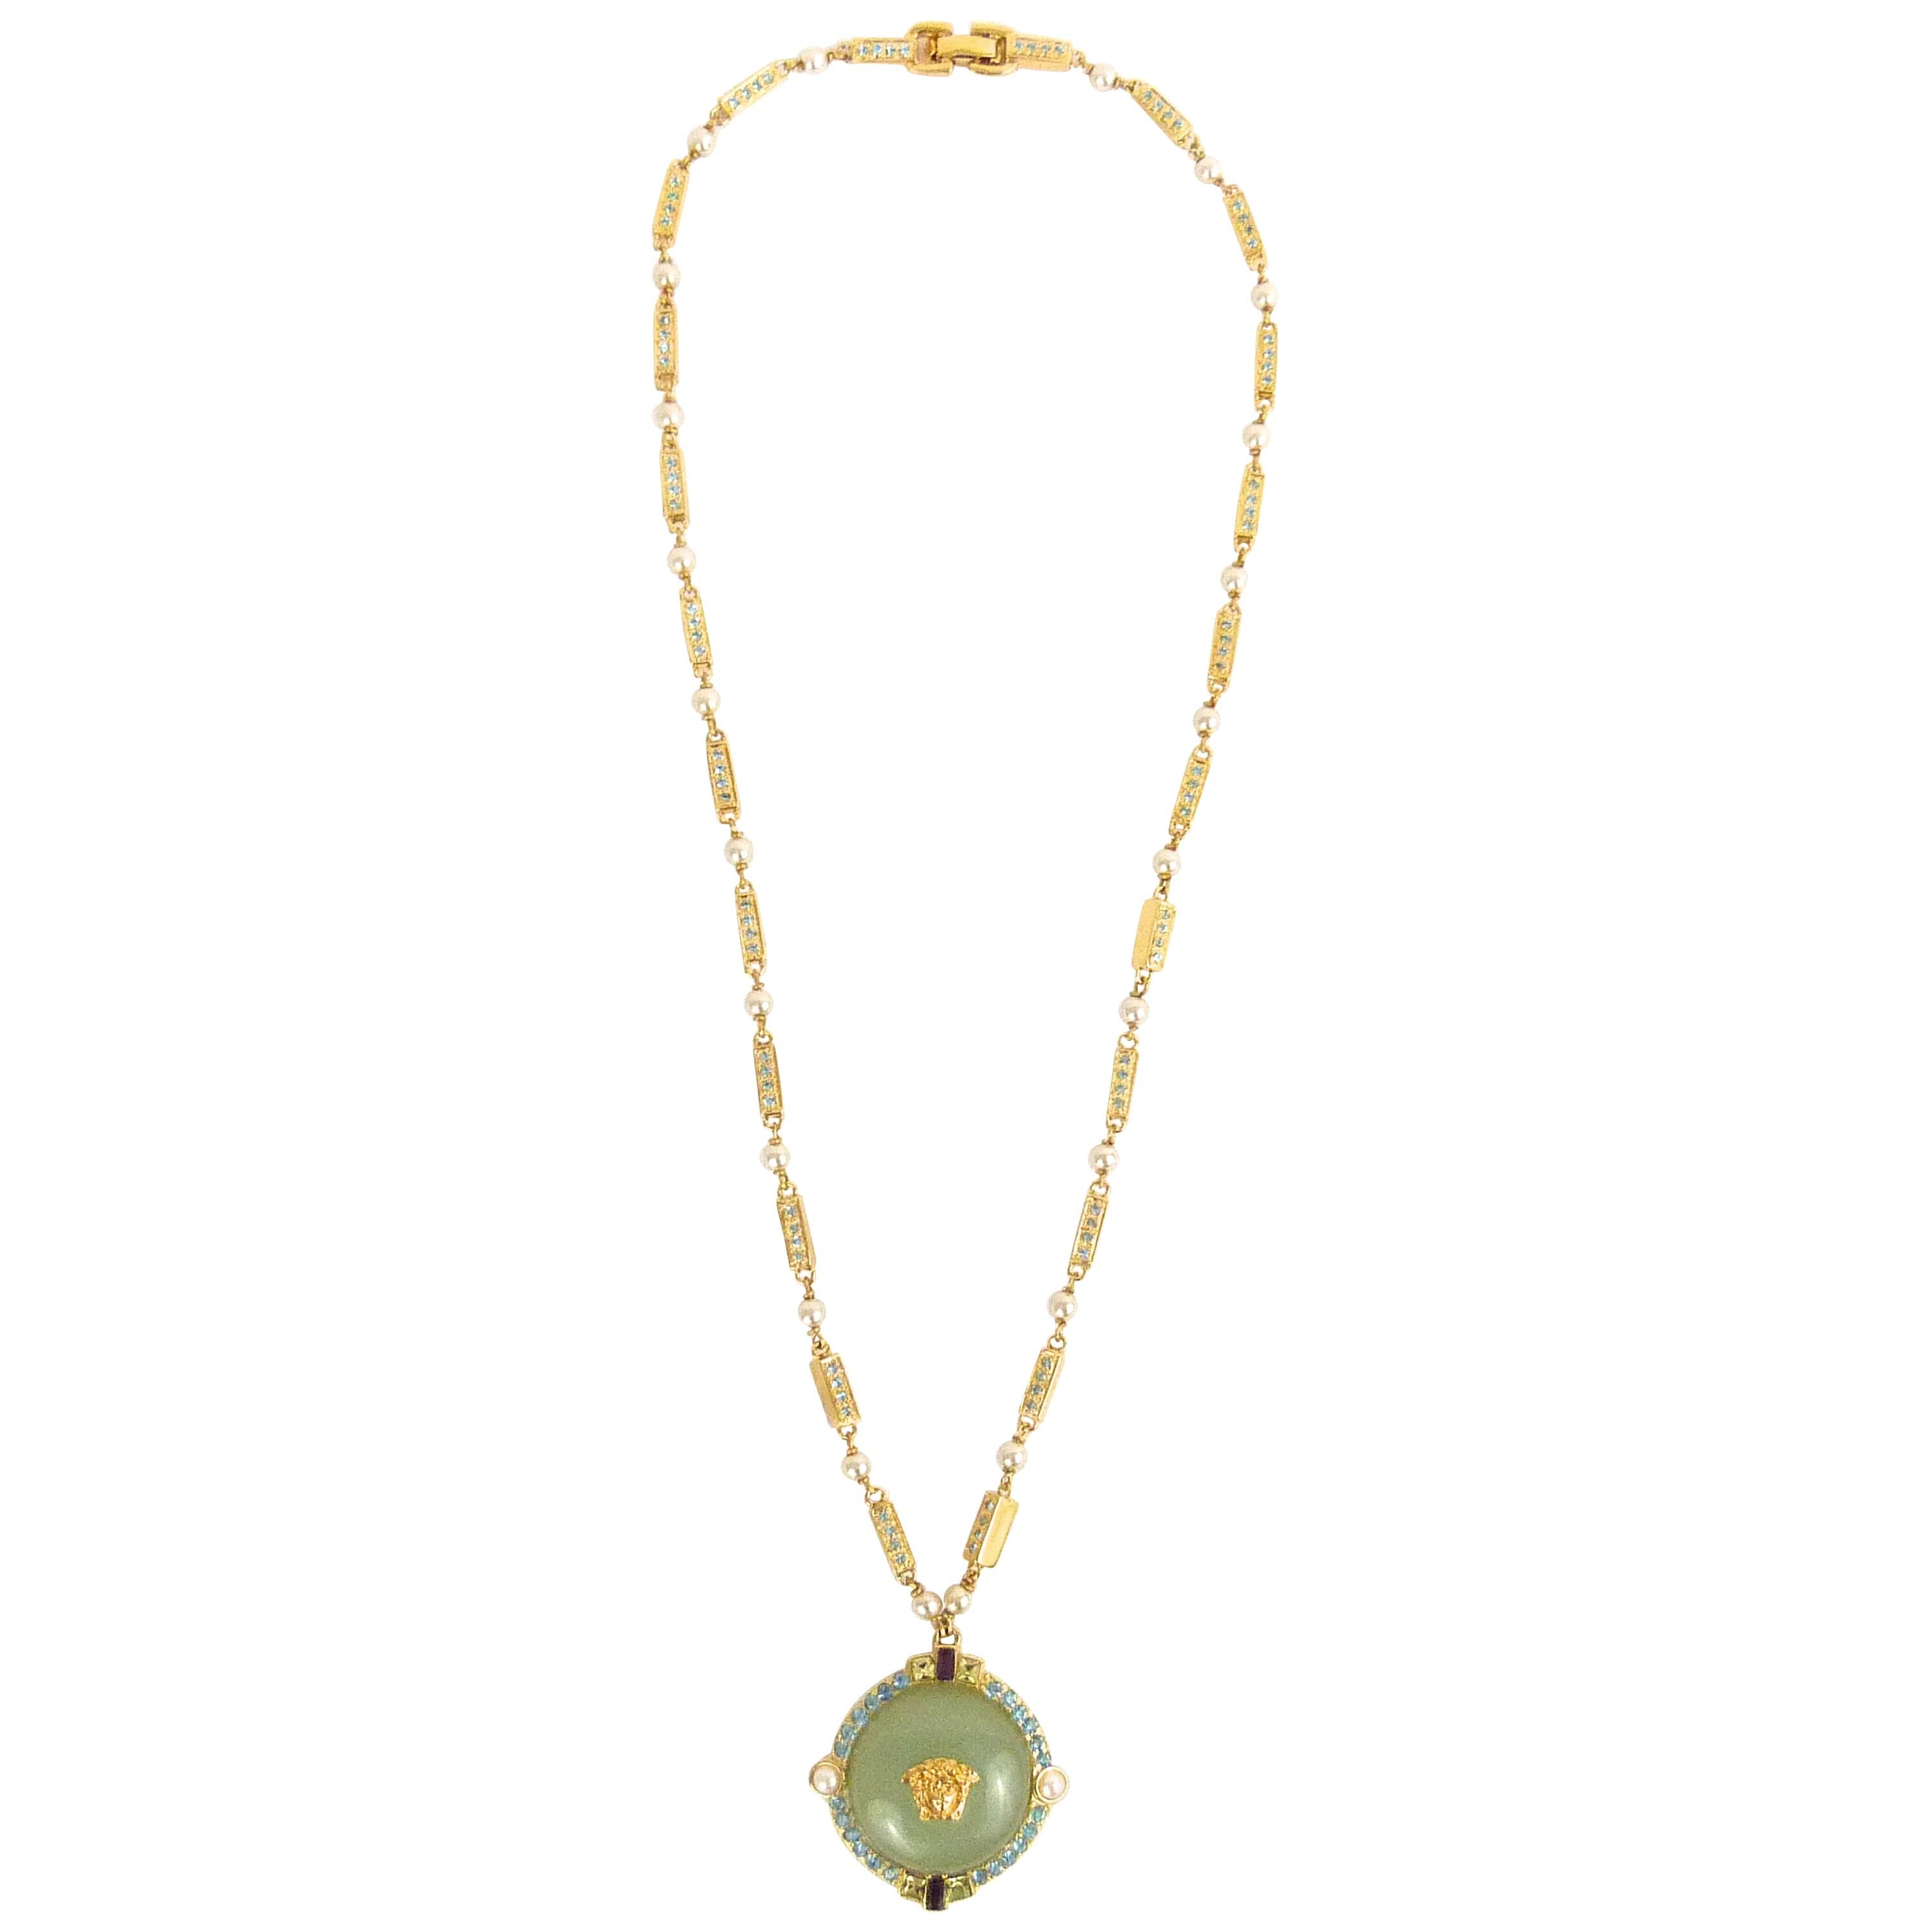 Gianni Versace jade green medusa pendant necklace with coloured stones